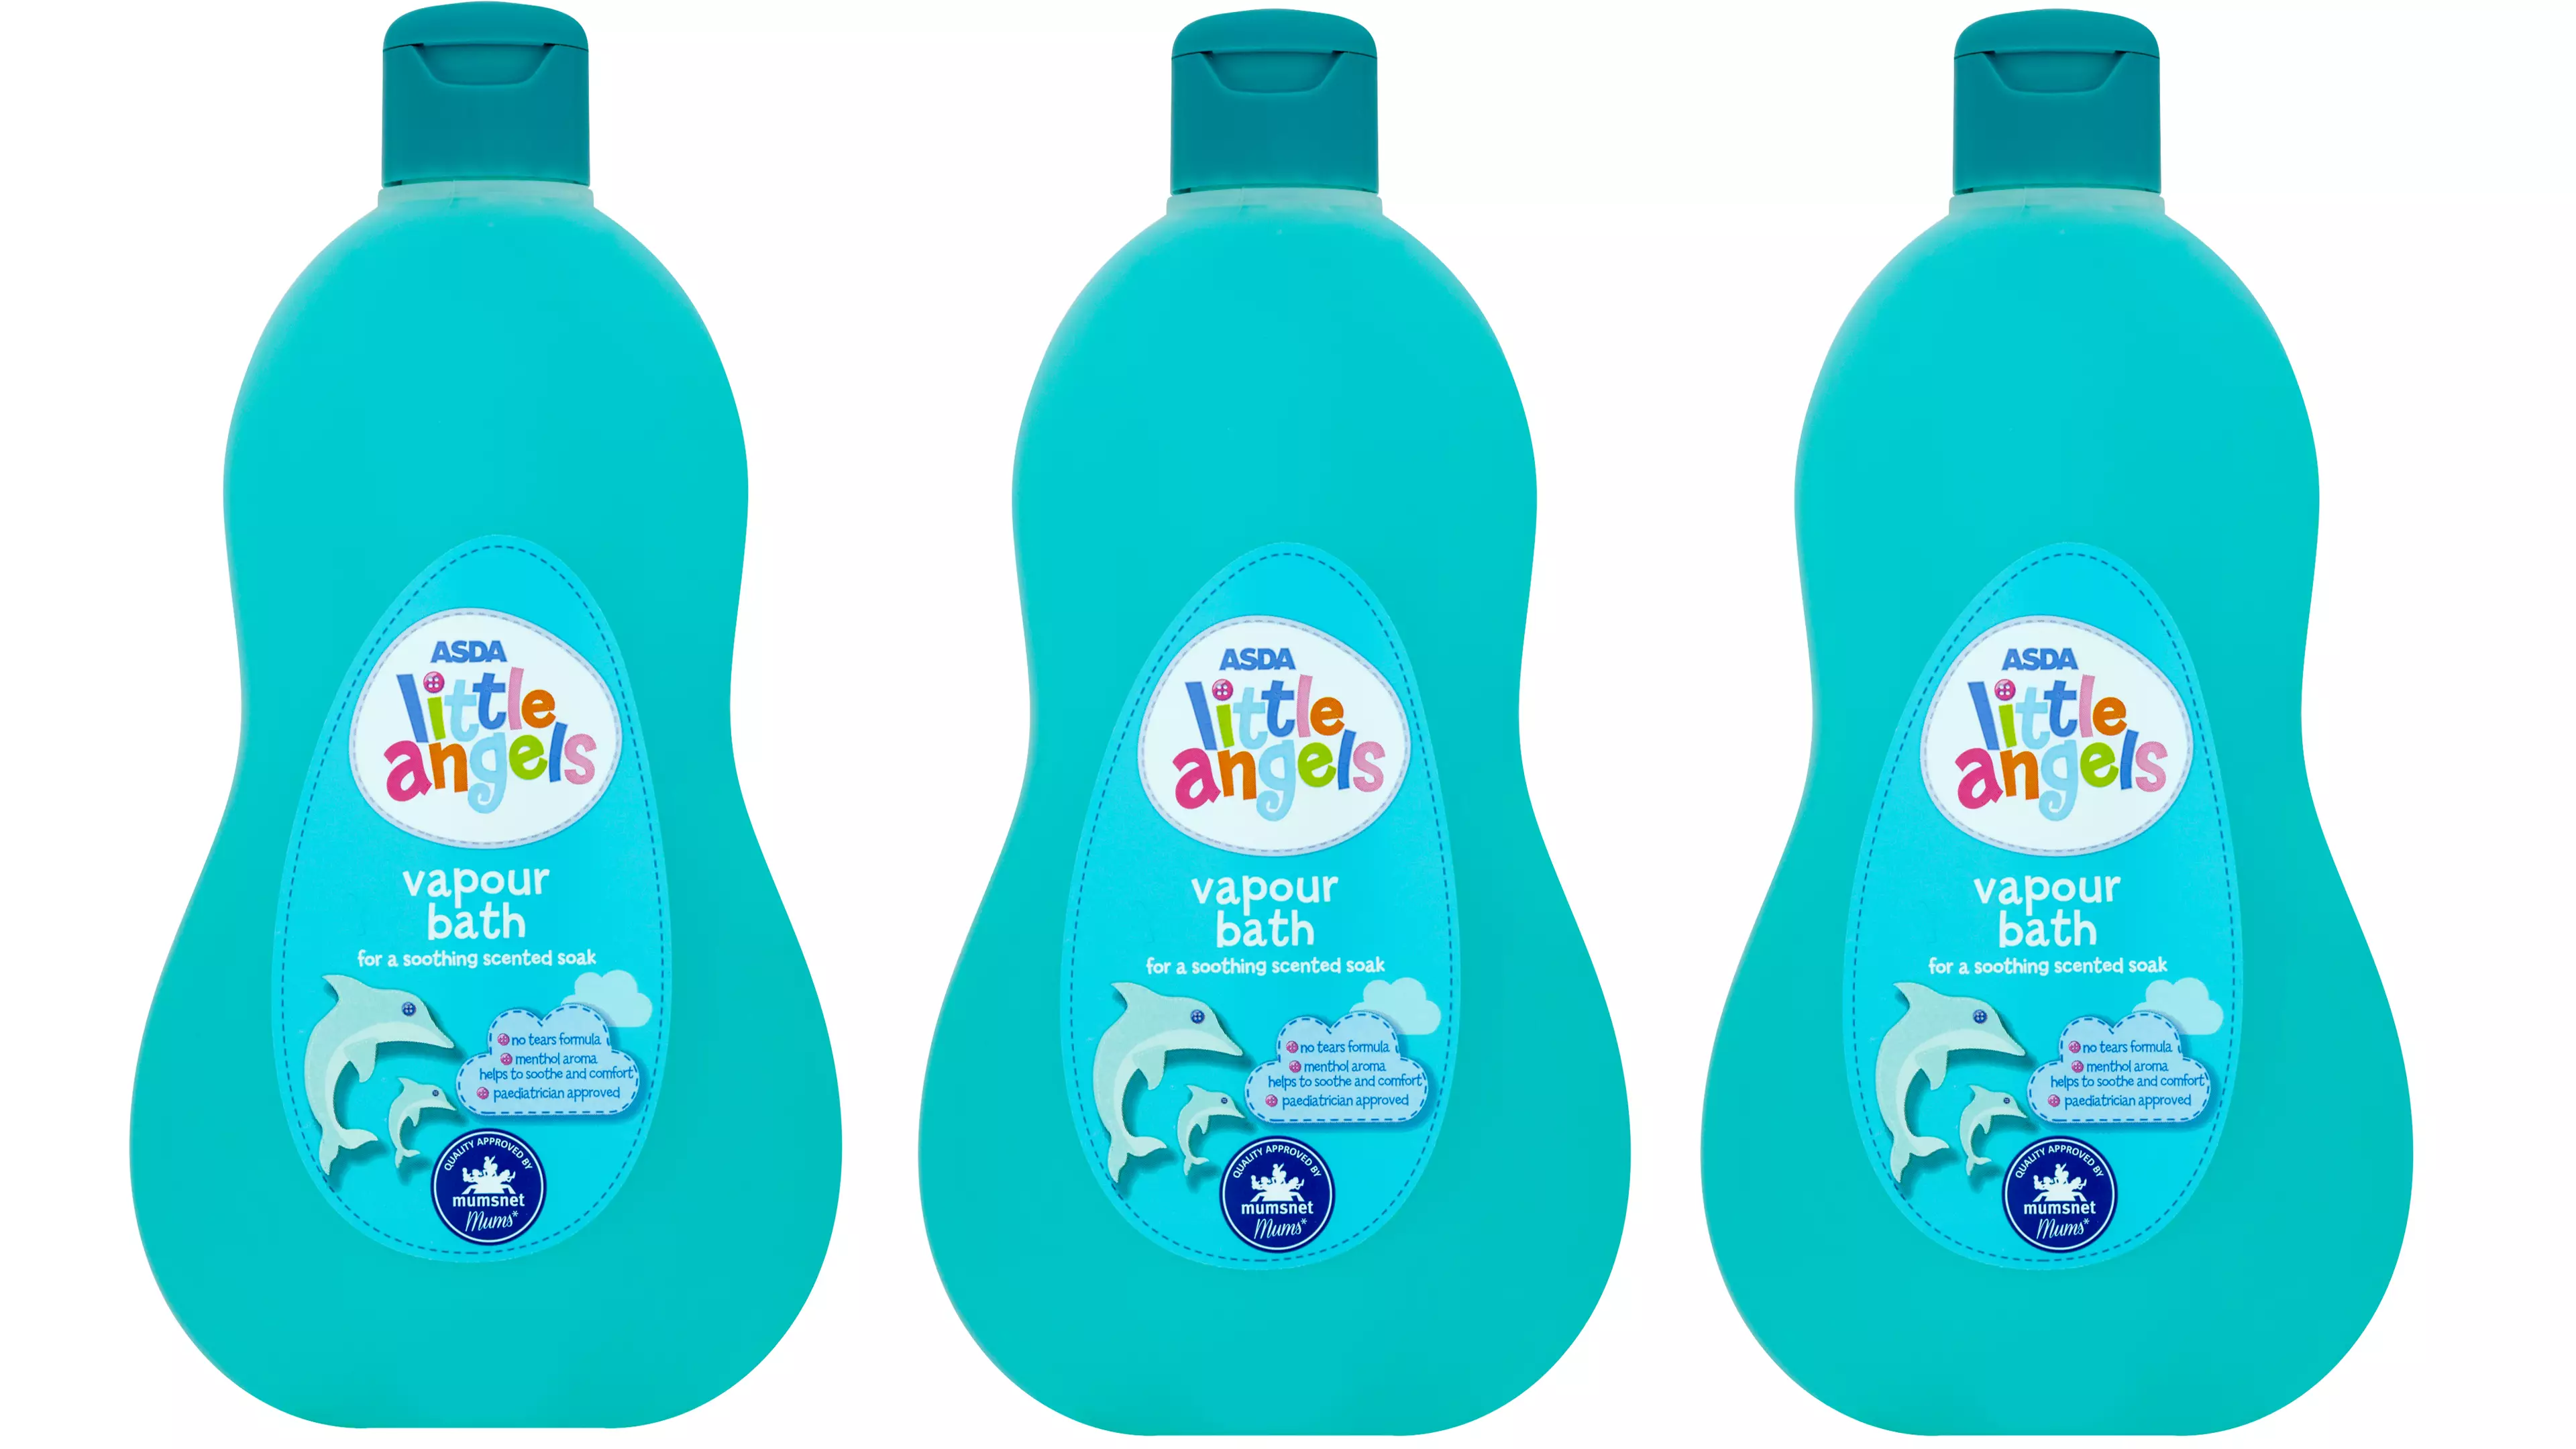 Mums Are Raving About This 87p Bubble Bath Which Sends Their Little Ones To Sleep